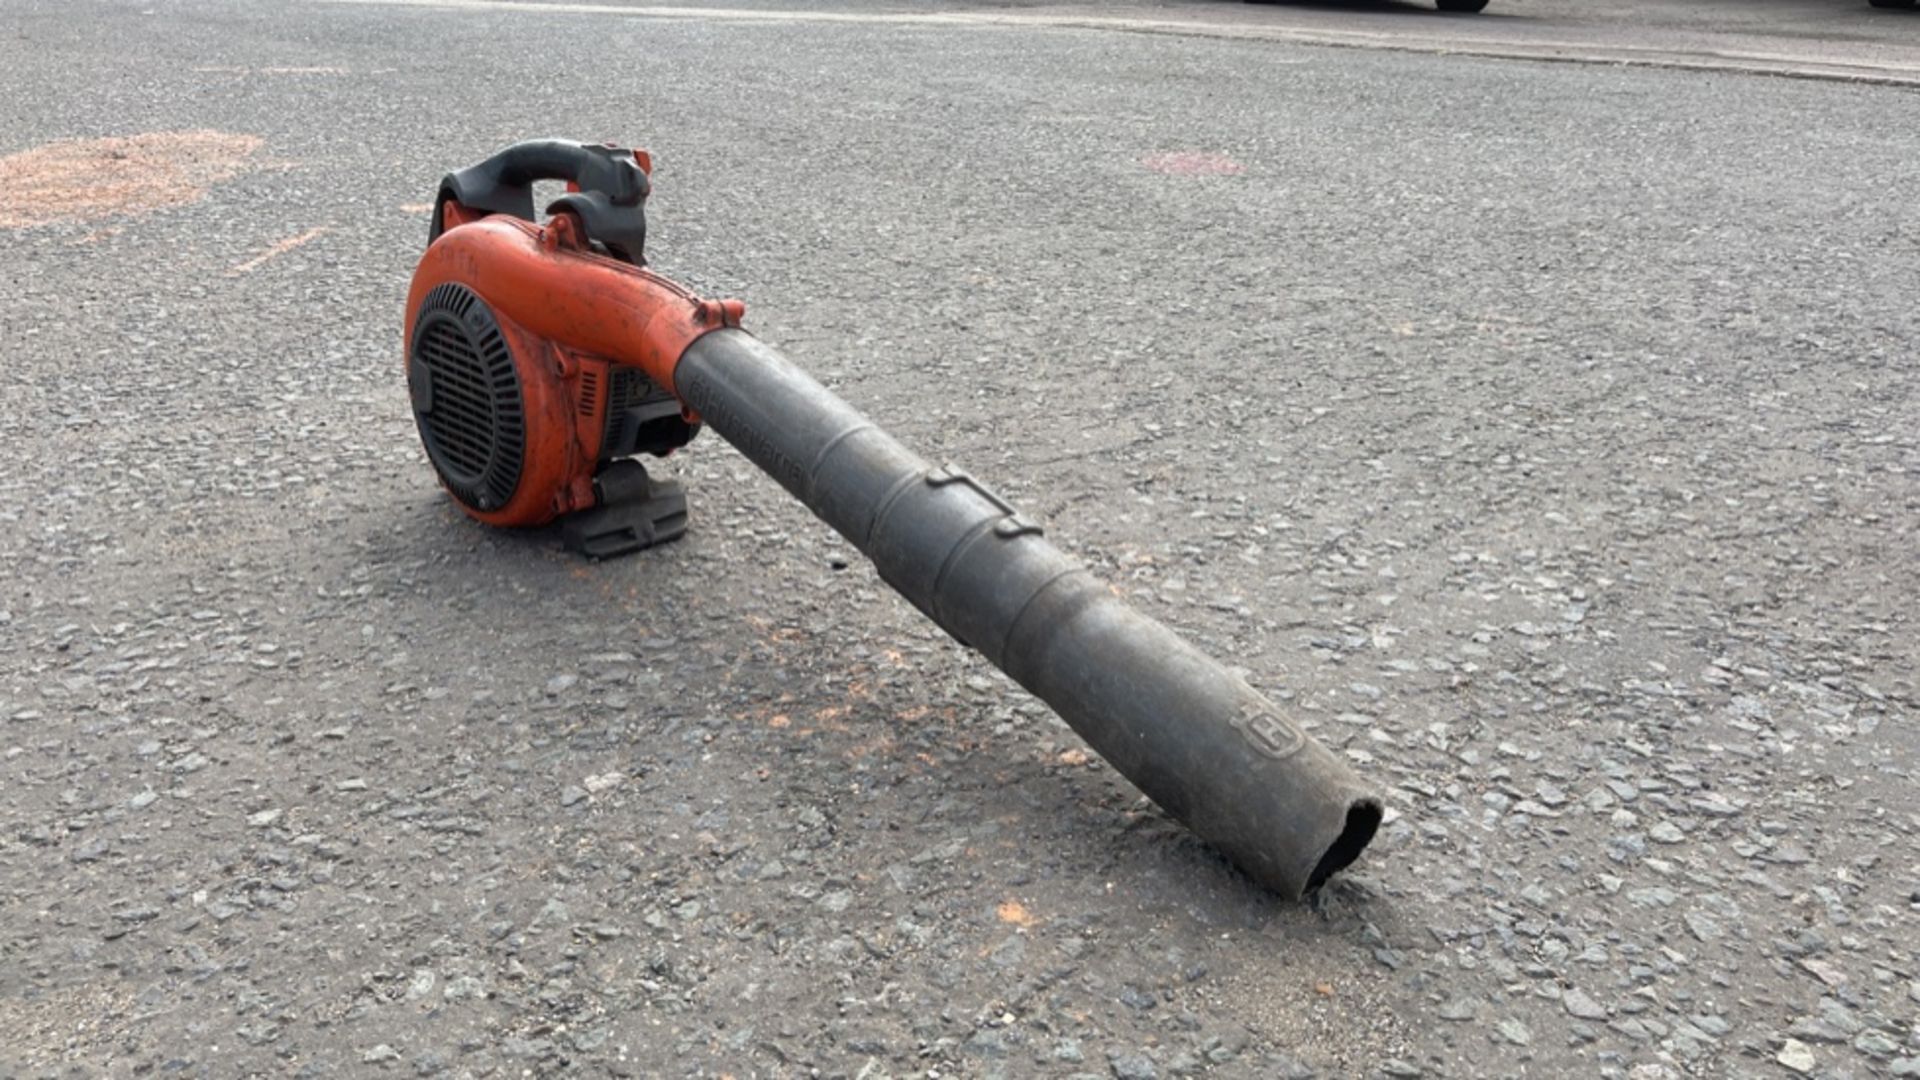 HUSQUARNA 525 BX PETROL LEAF BLOWER *NON-RUNNER - FOR SPARES OR REPAIR ONLY*